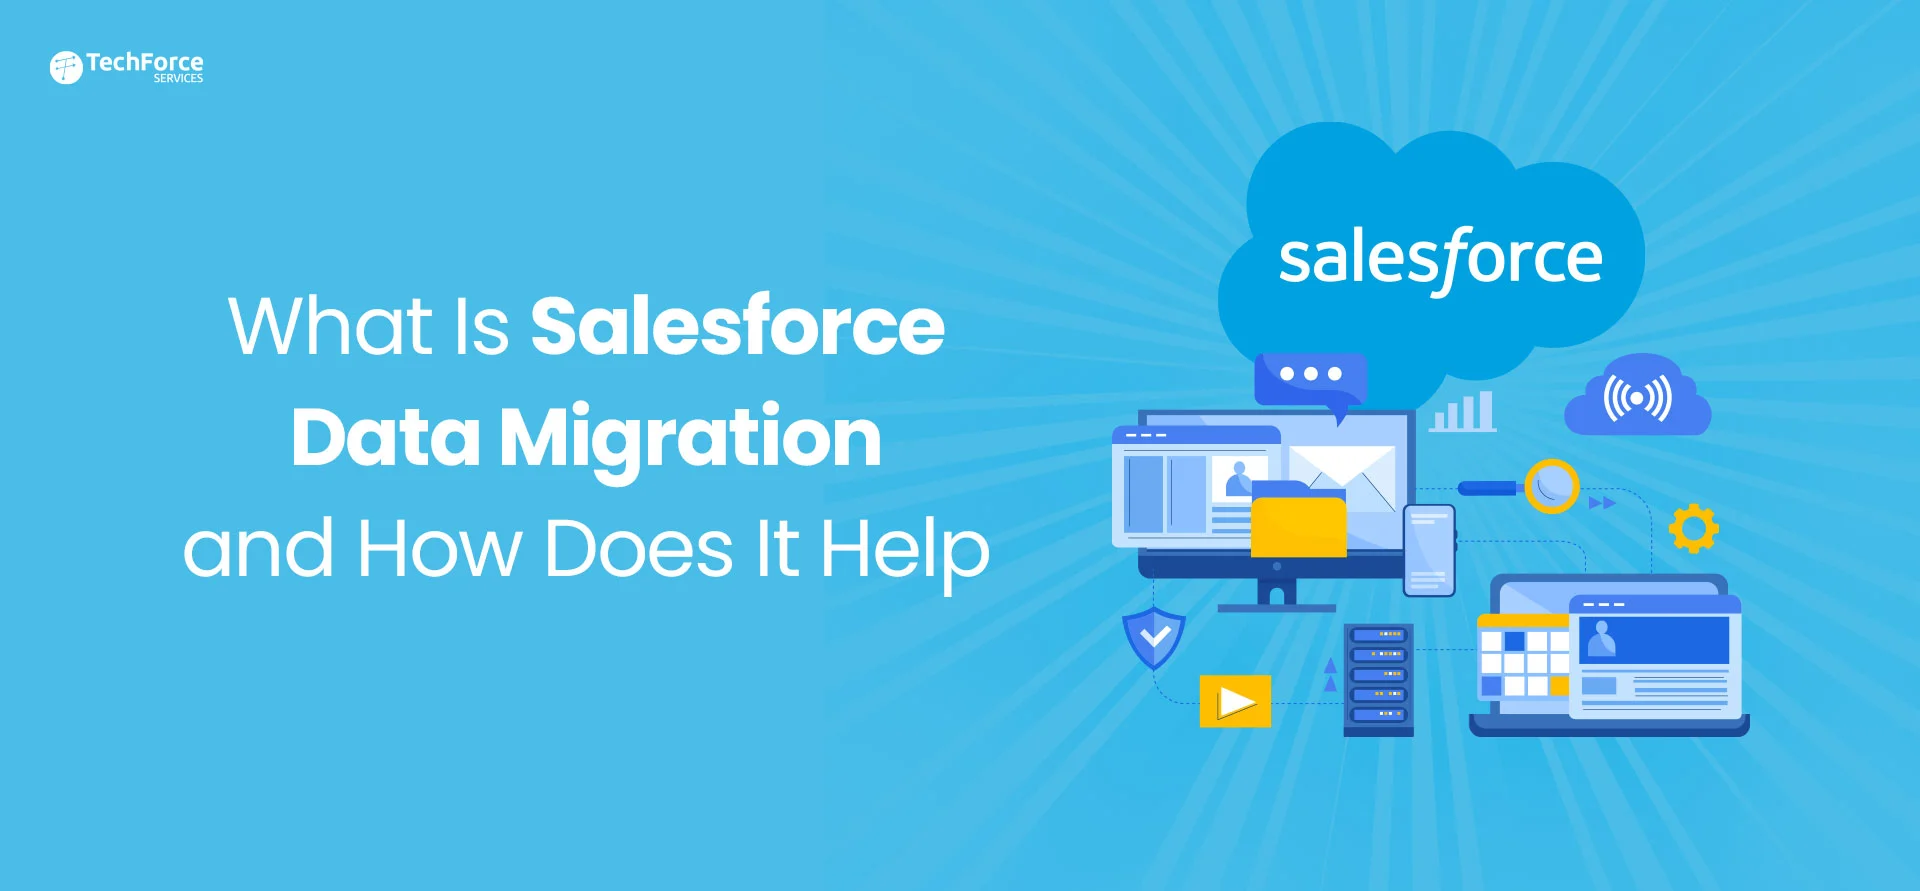 What-Is-Salesforce-Data-Migration-and-How-Does-It-Help